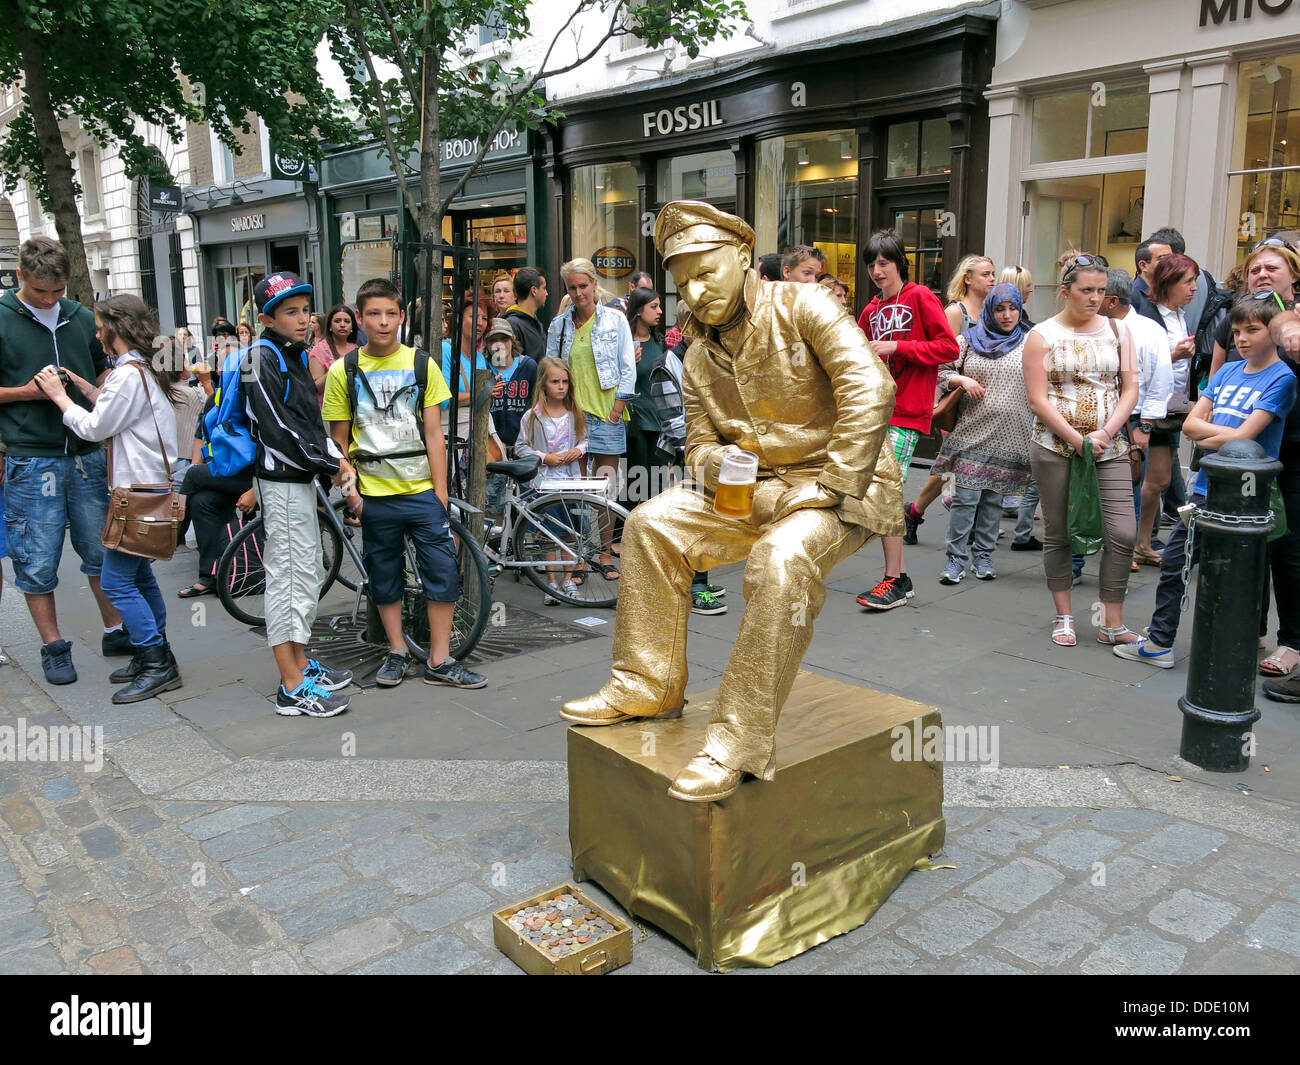 Street performer busker dressed in gold sitting on an invisible chair in Covent Garden, London Stock Photo